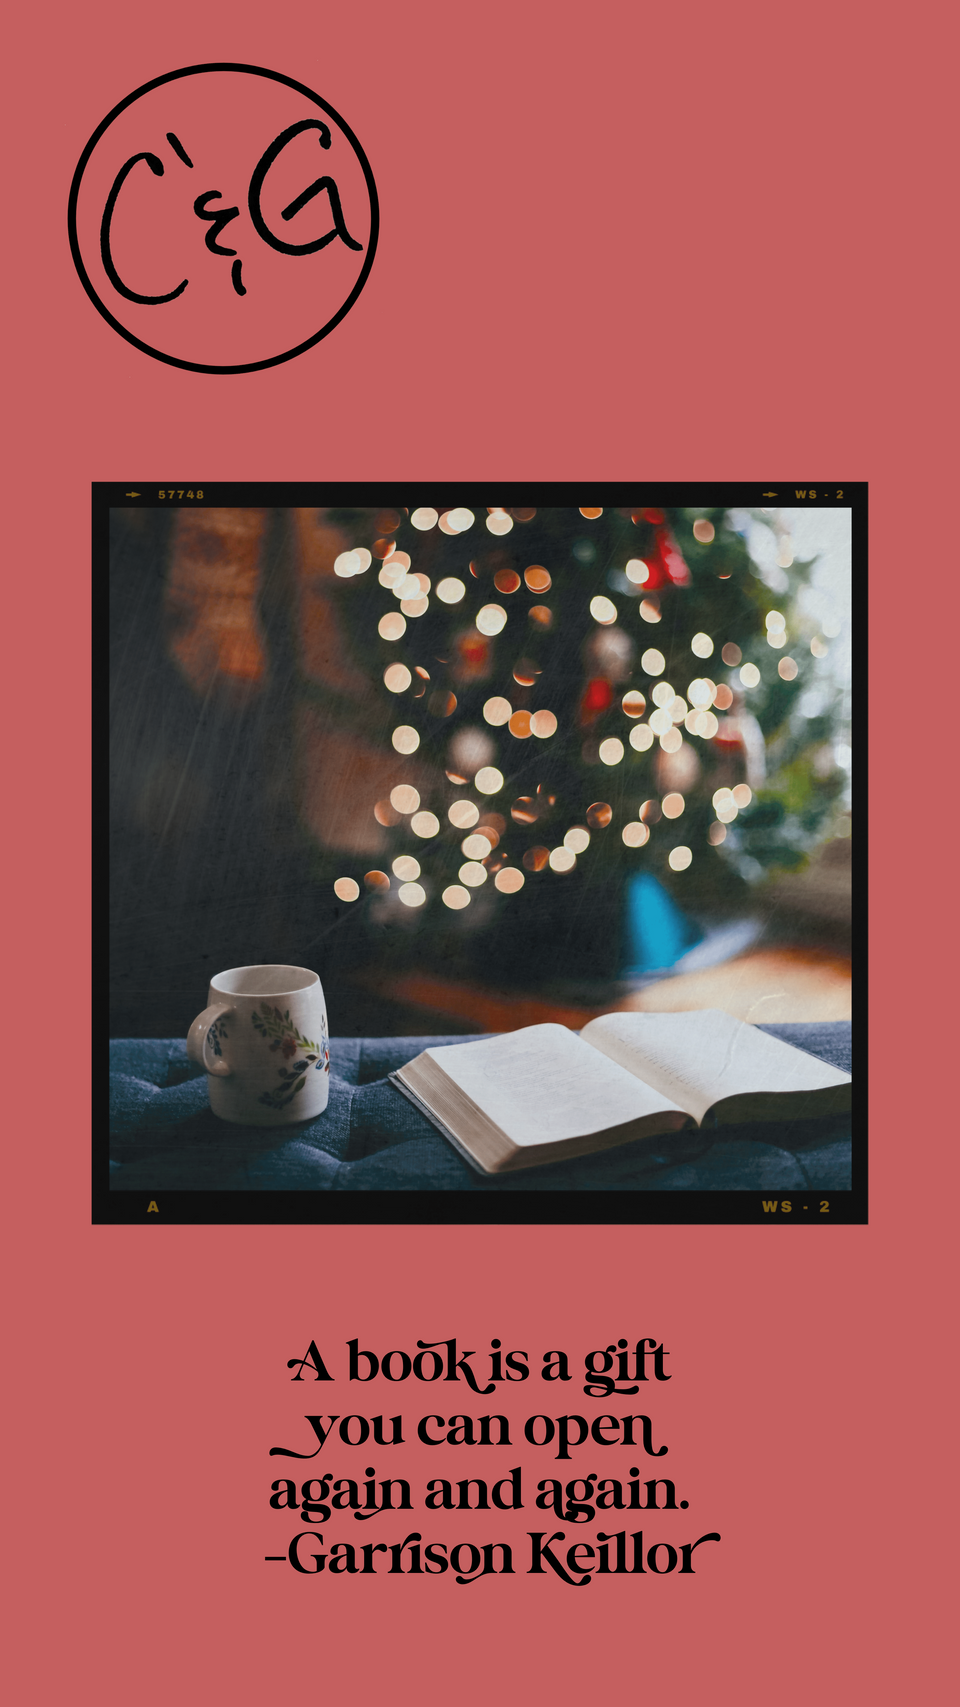 Reading and the holidays